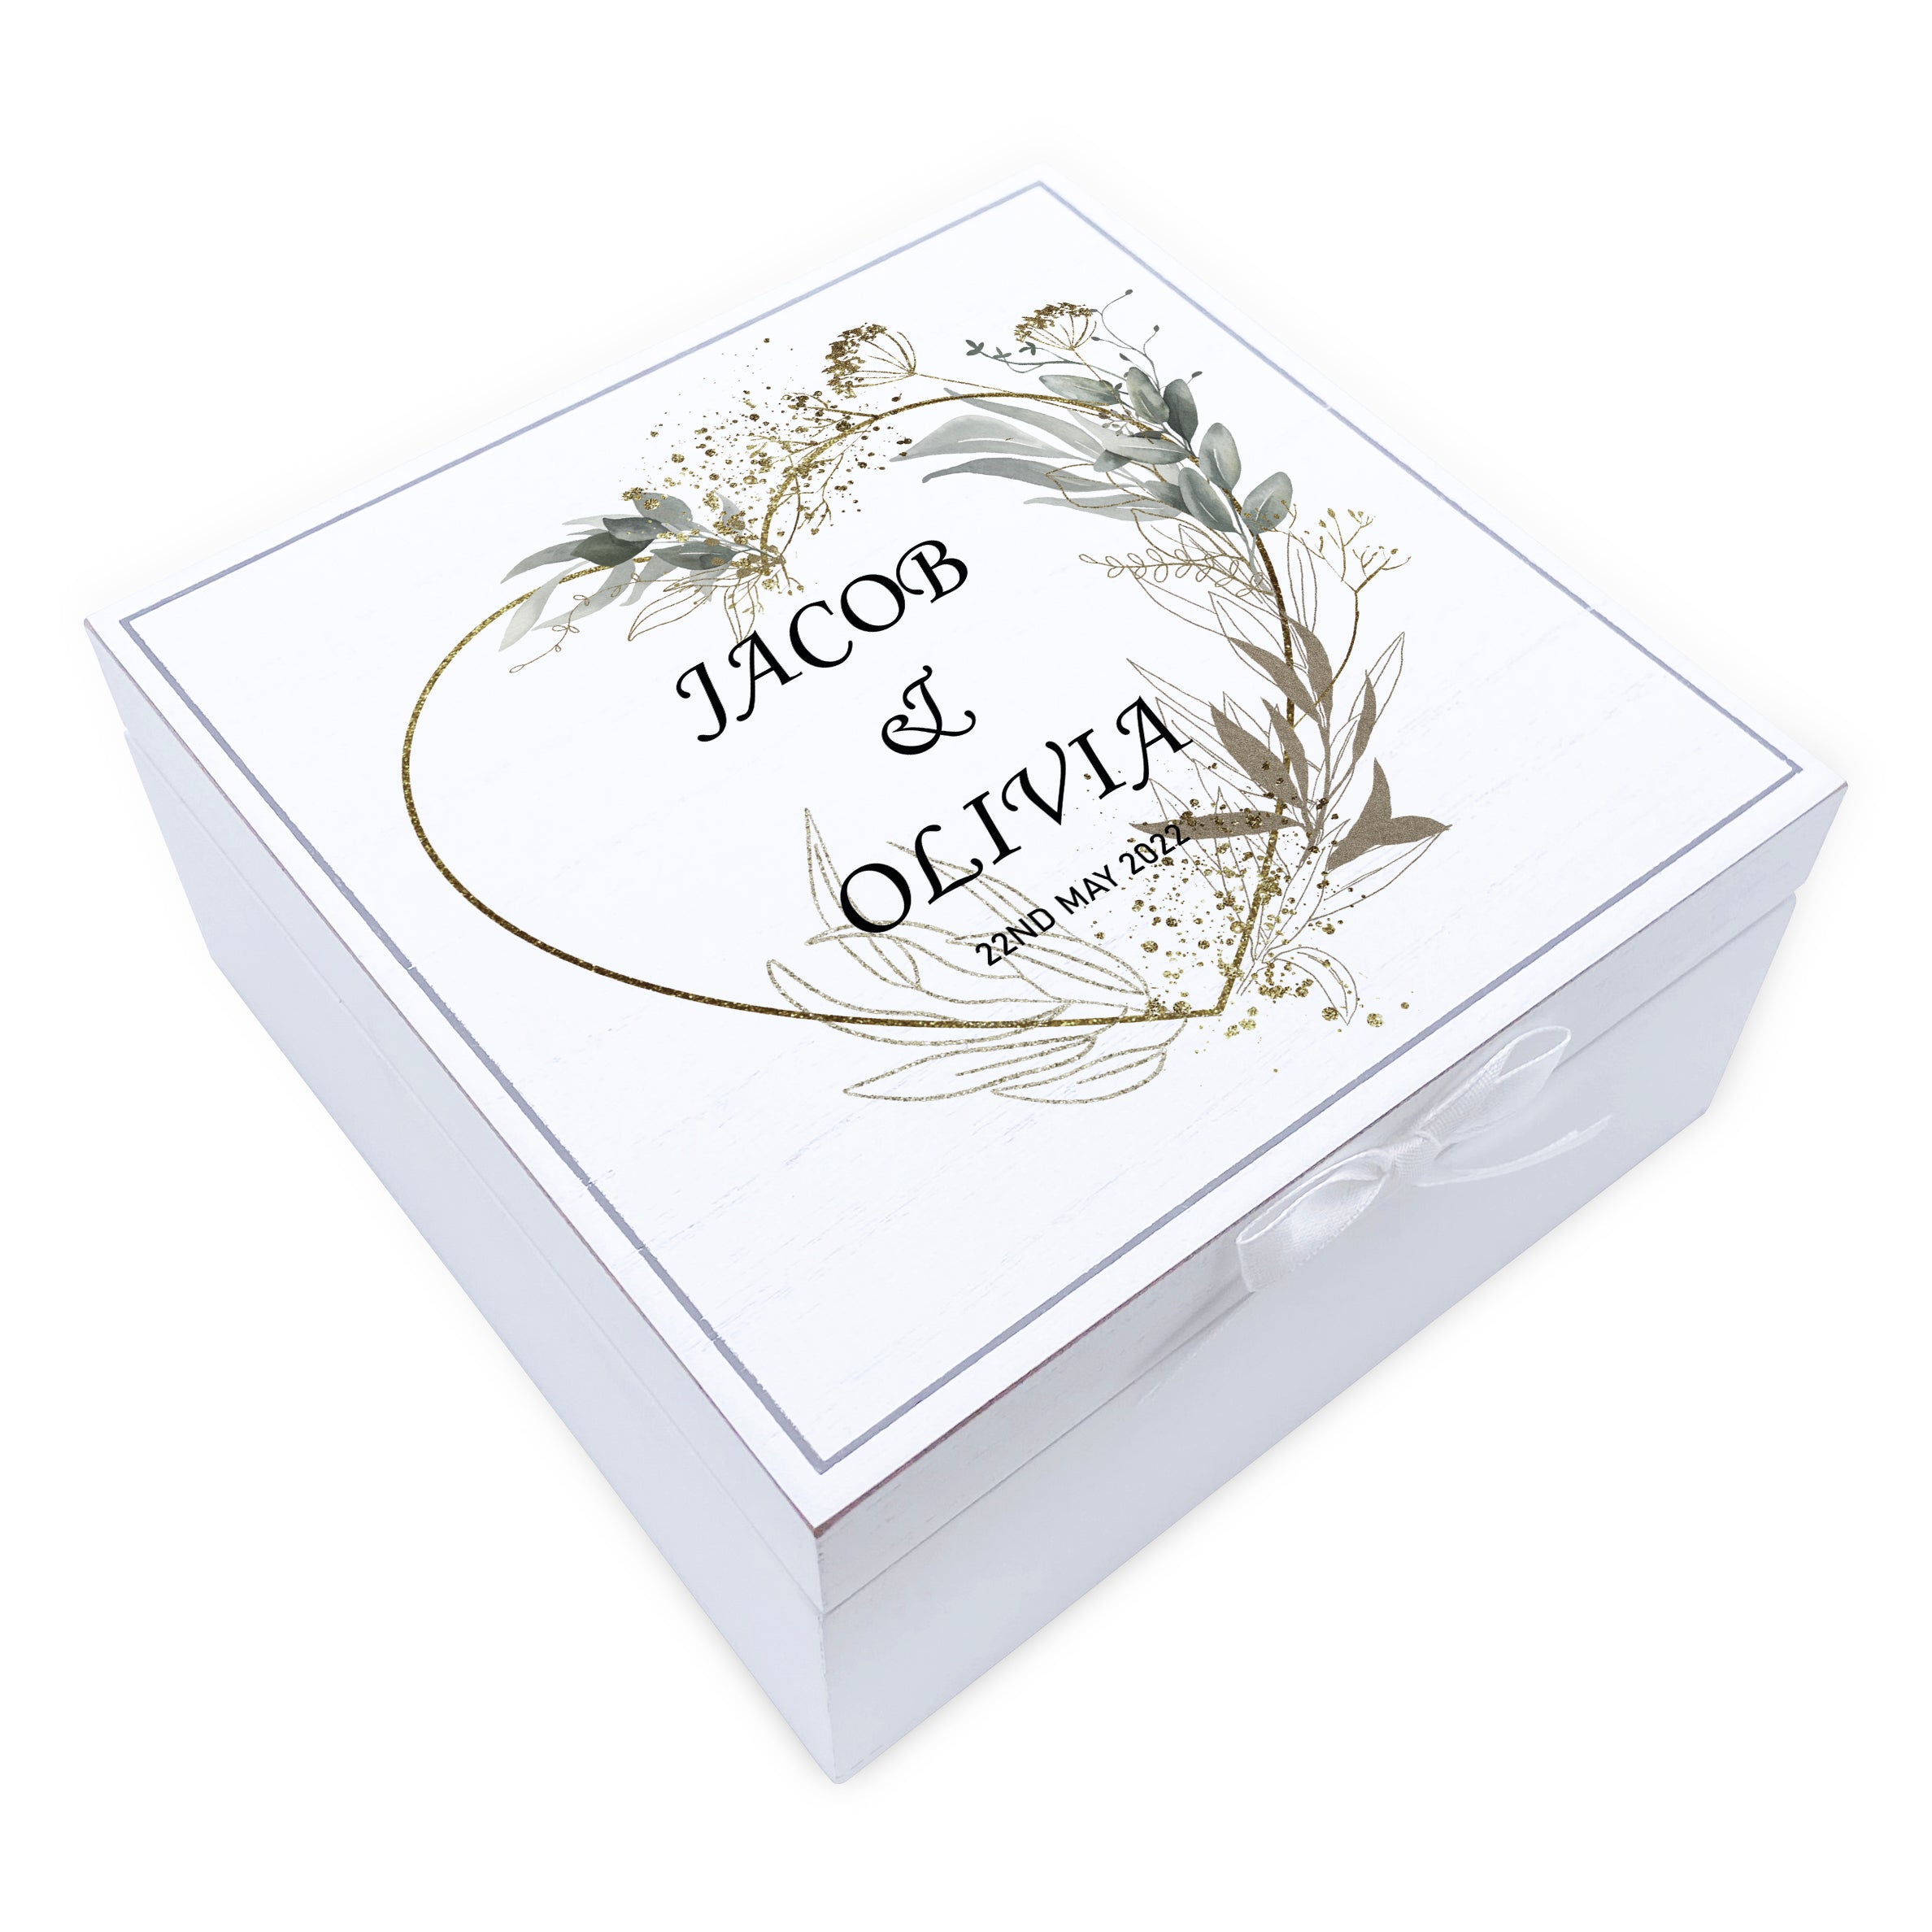 Personalised Wedding Day Vintage Wooden Keepsake Box Gift With Gold & Grey Heart Print